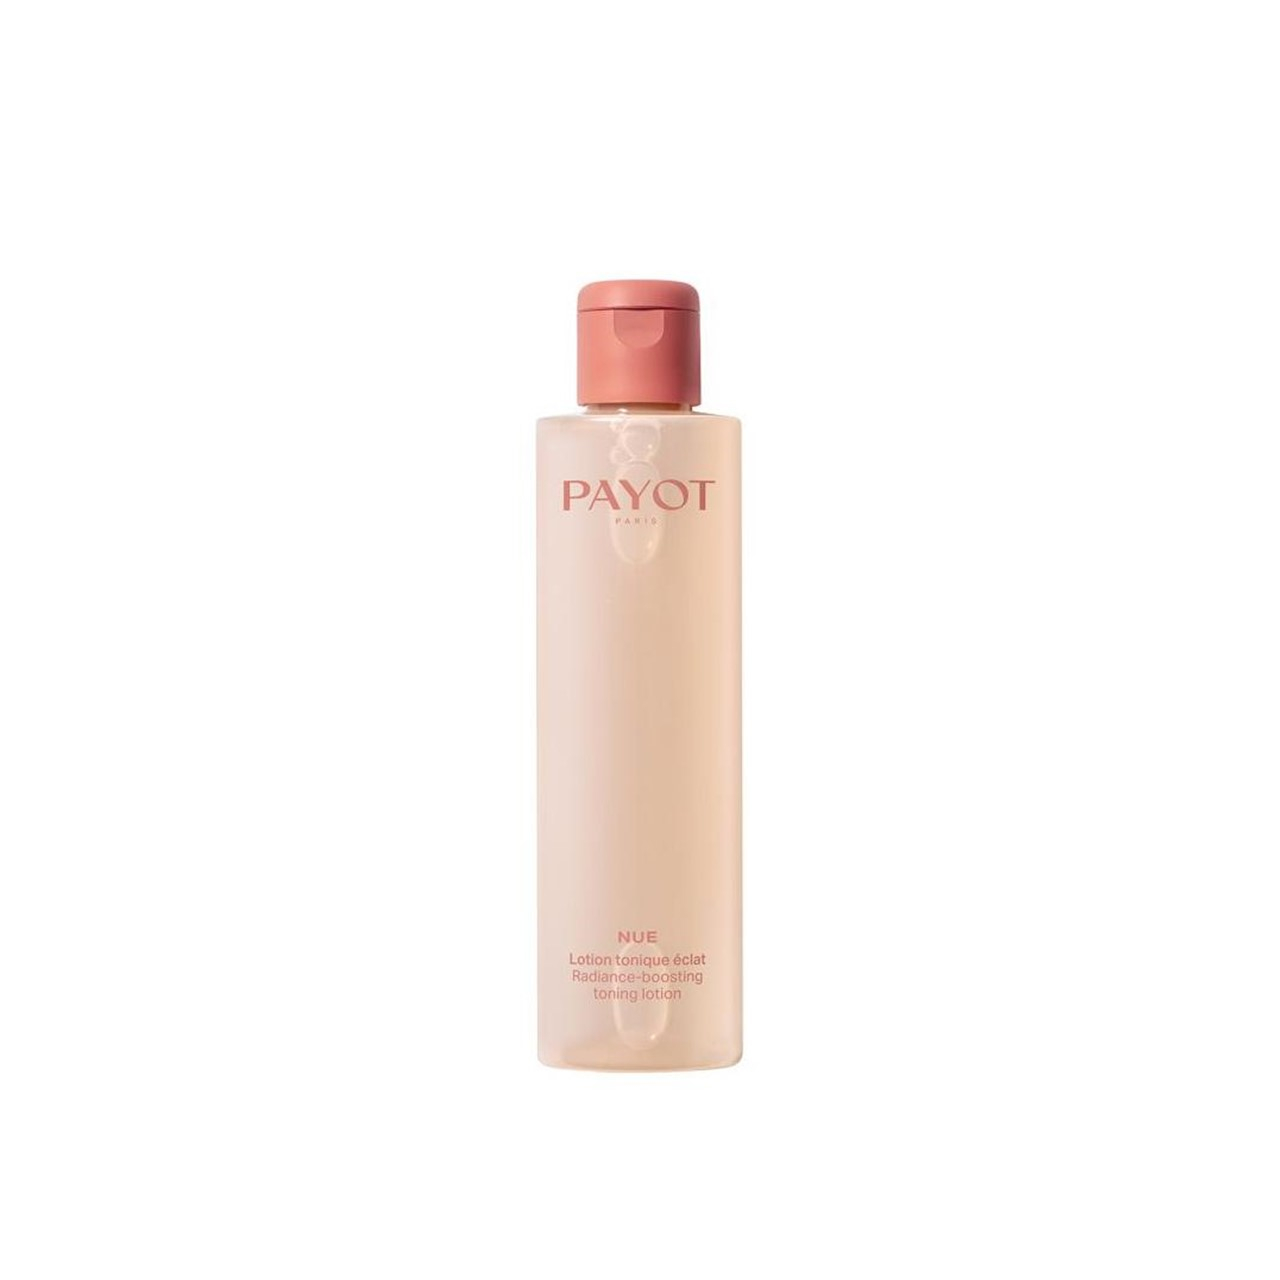 Payot Nue Radiance-Boosting Toning Lotion 200ml